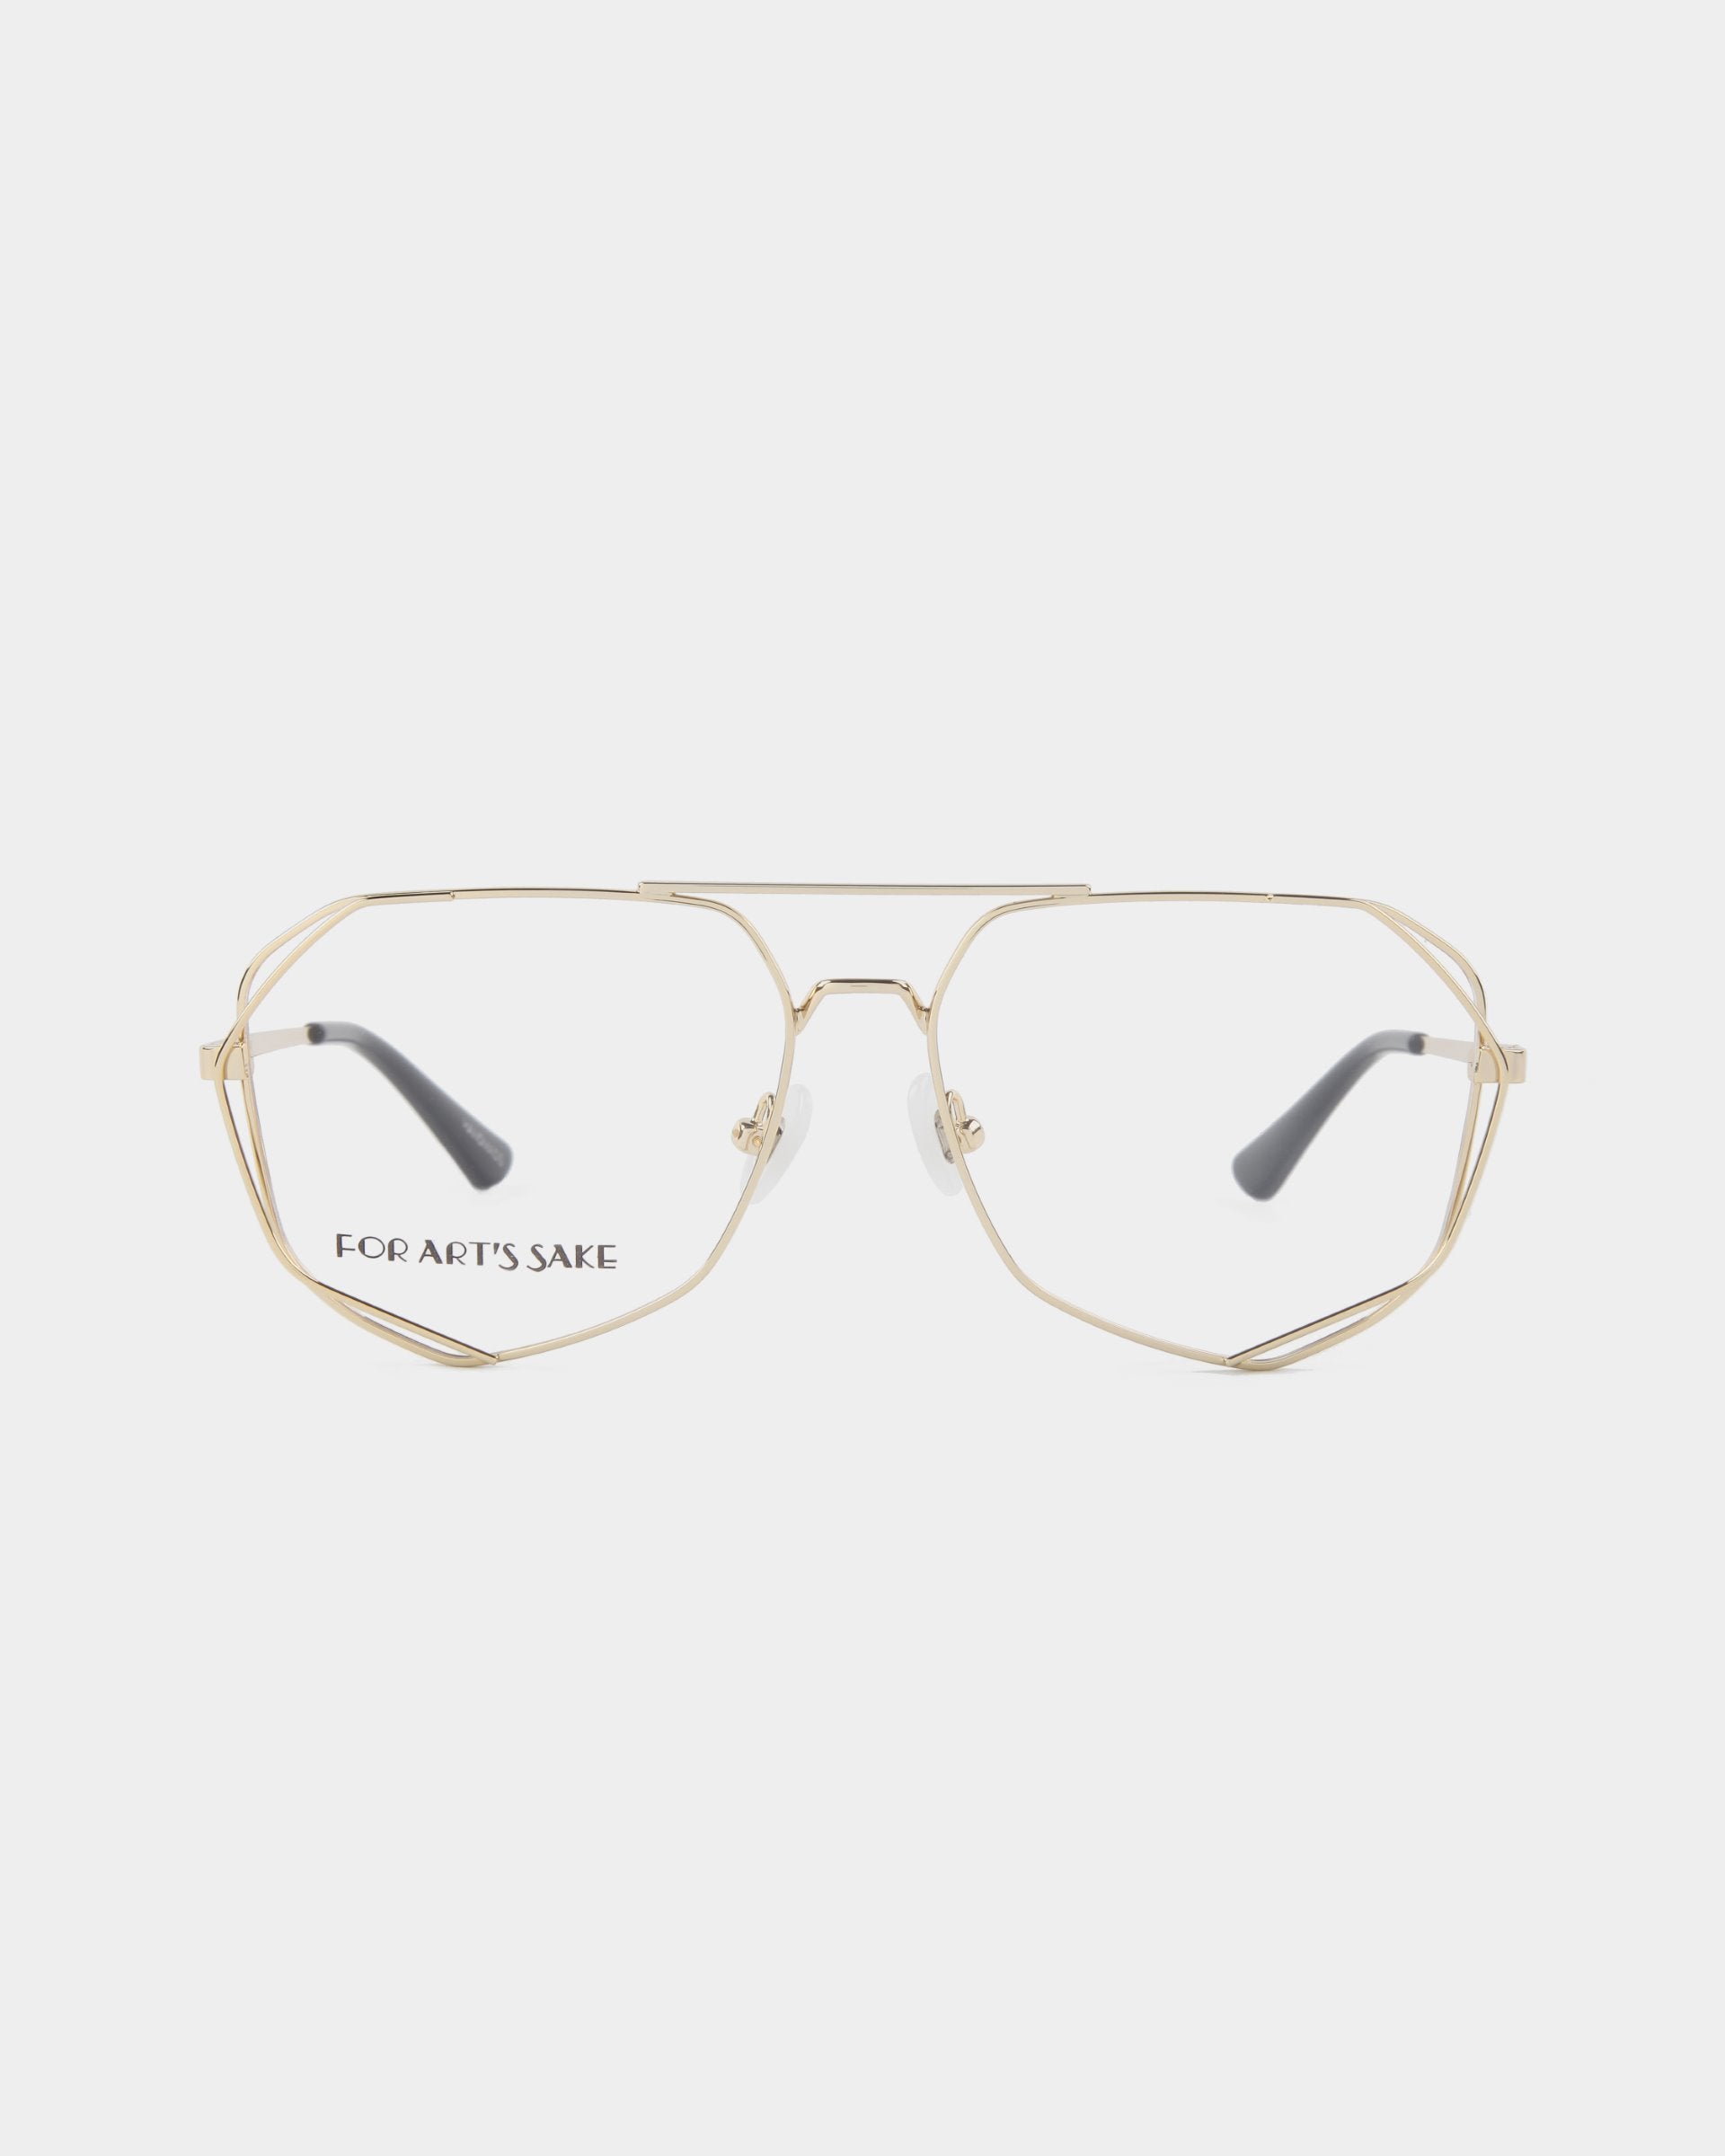 A pair of geometric gold wire-frame eyeglasses with clear lenses, featuring hexagonal rims and black temple tips. The brand name "For Art's Sake®" is inscribed in black on the inside of the left lens. Crafted with stainless steel frames, they come with an optional Blue Light Filter. The product name is Genius. Background is plain white.